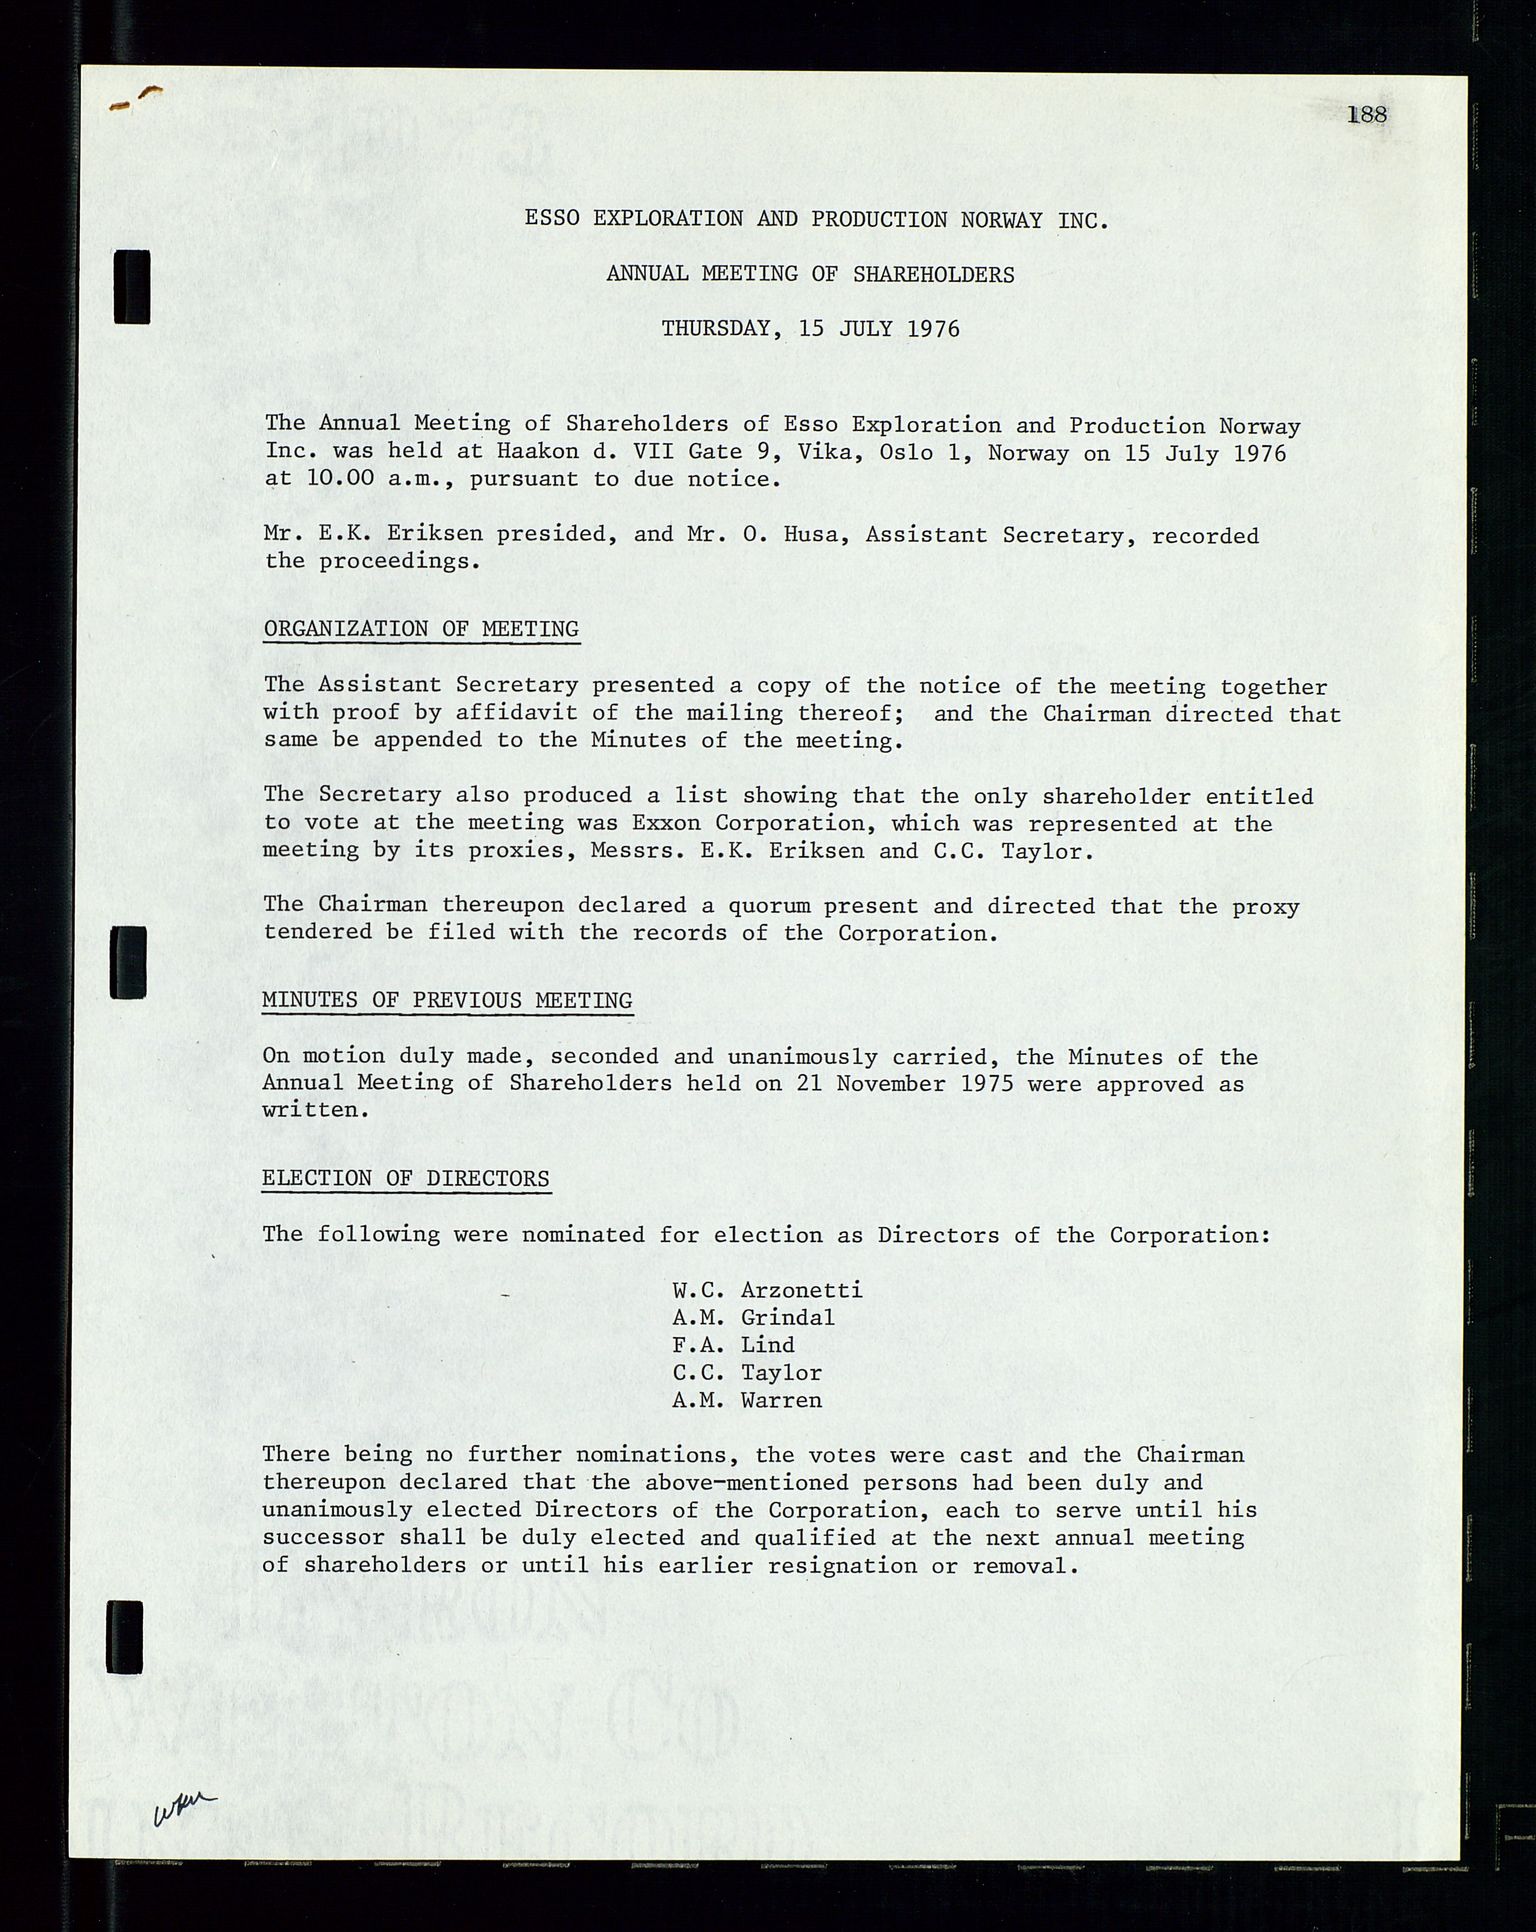 Pa 1512 - Esso Exploration and Production Norway Inc., SAST/A-101917/A/Aa/L0001/0002: Styredokumenter / Corporate records, Board meeting minutes, Agreements, Stocholder meetings, 1975-1979, p. 31